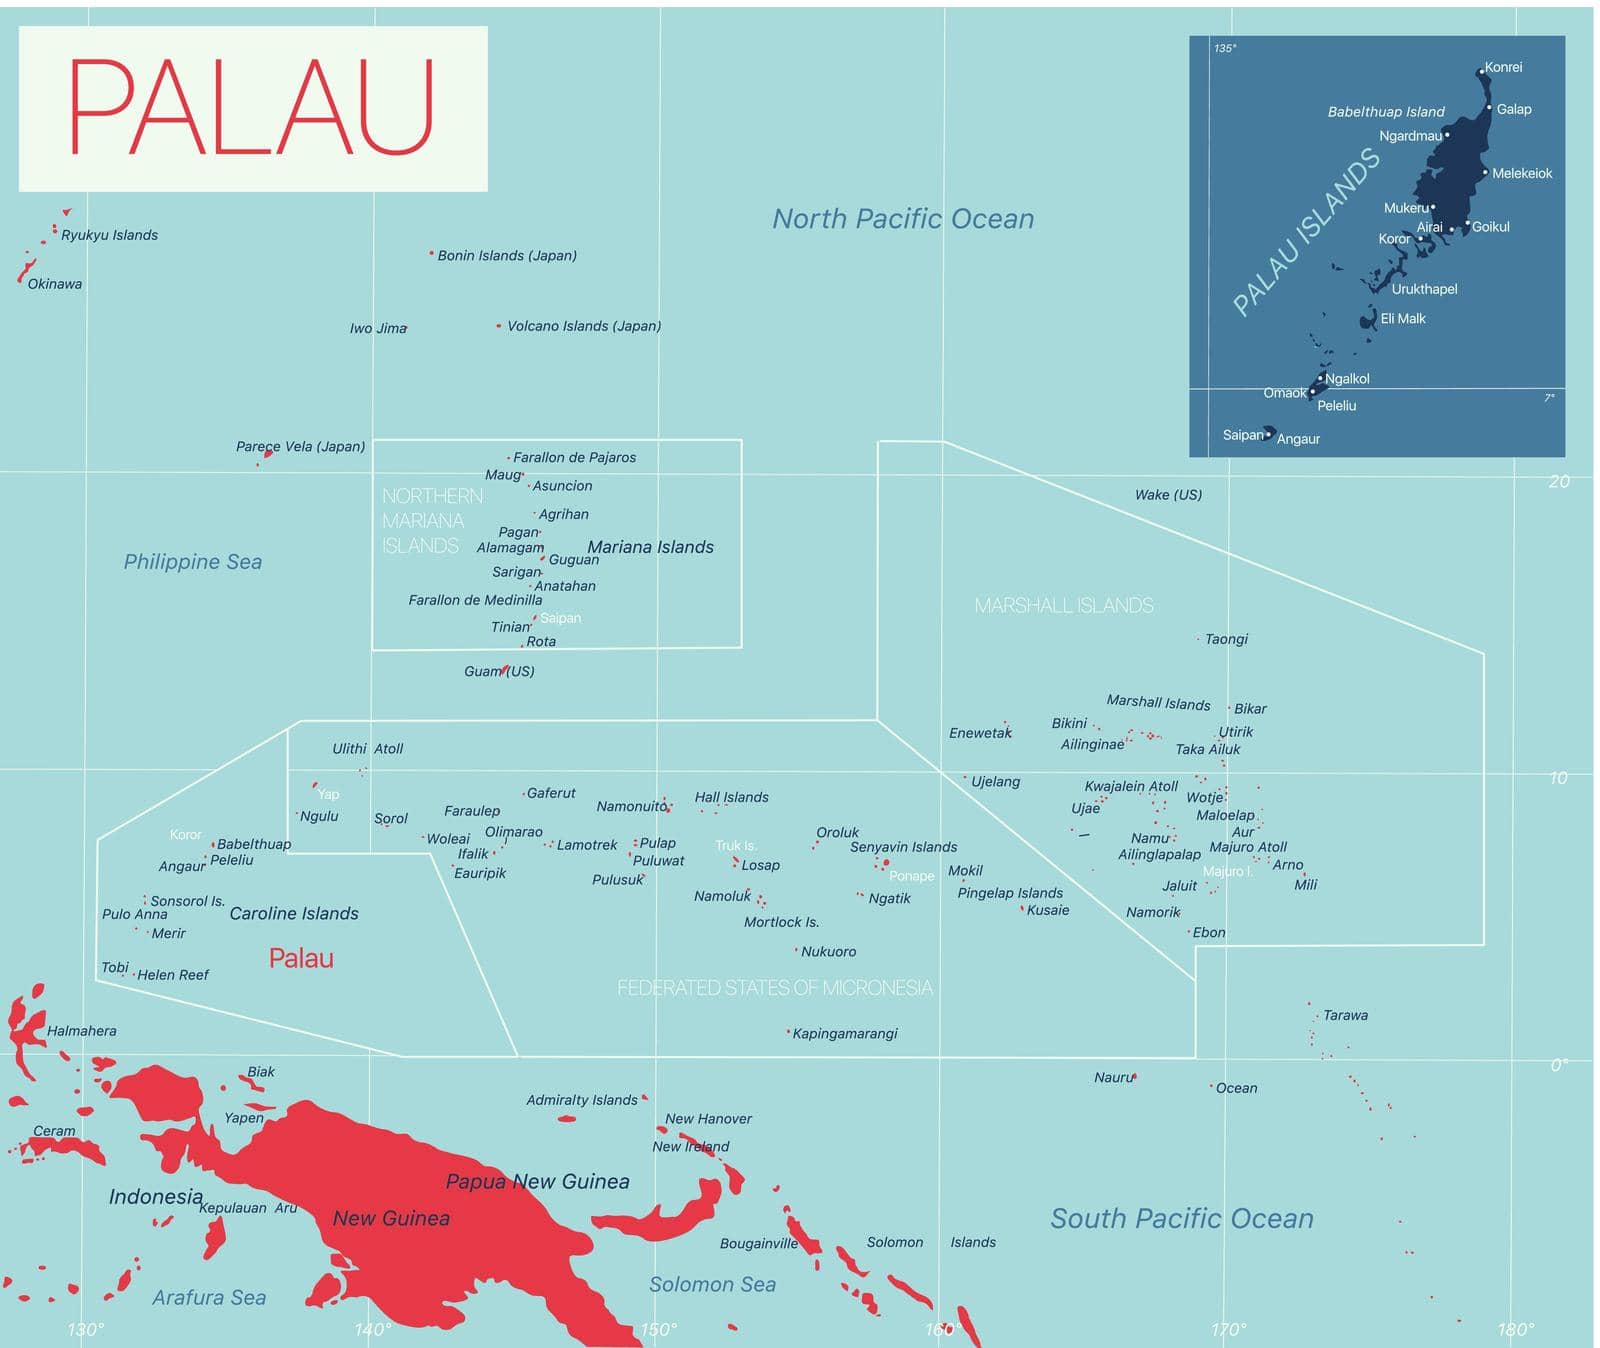 Palau detailed editable map with cities and towns, geographic sites. Vector EPS-10 file